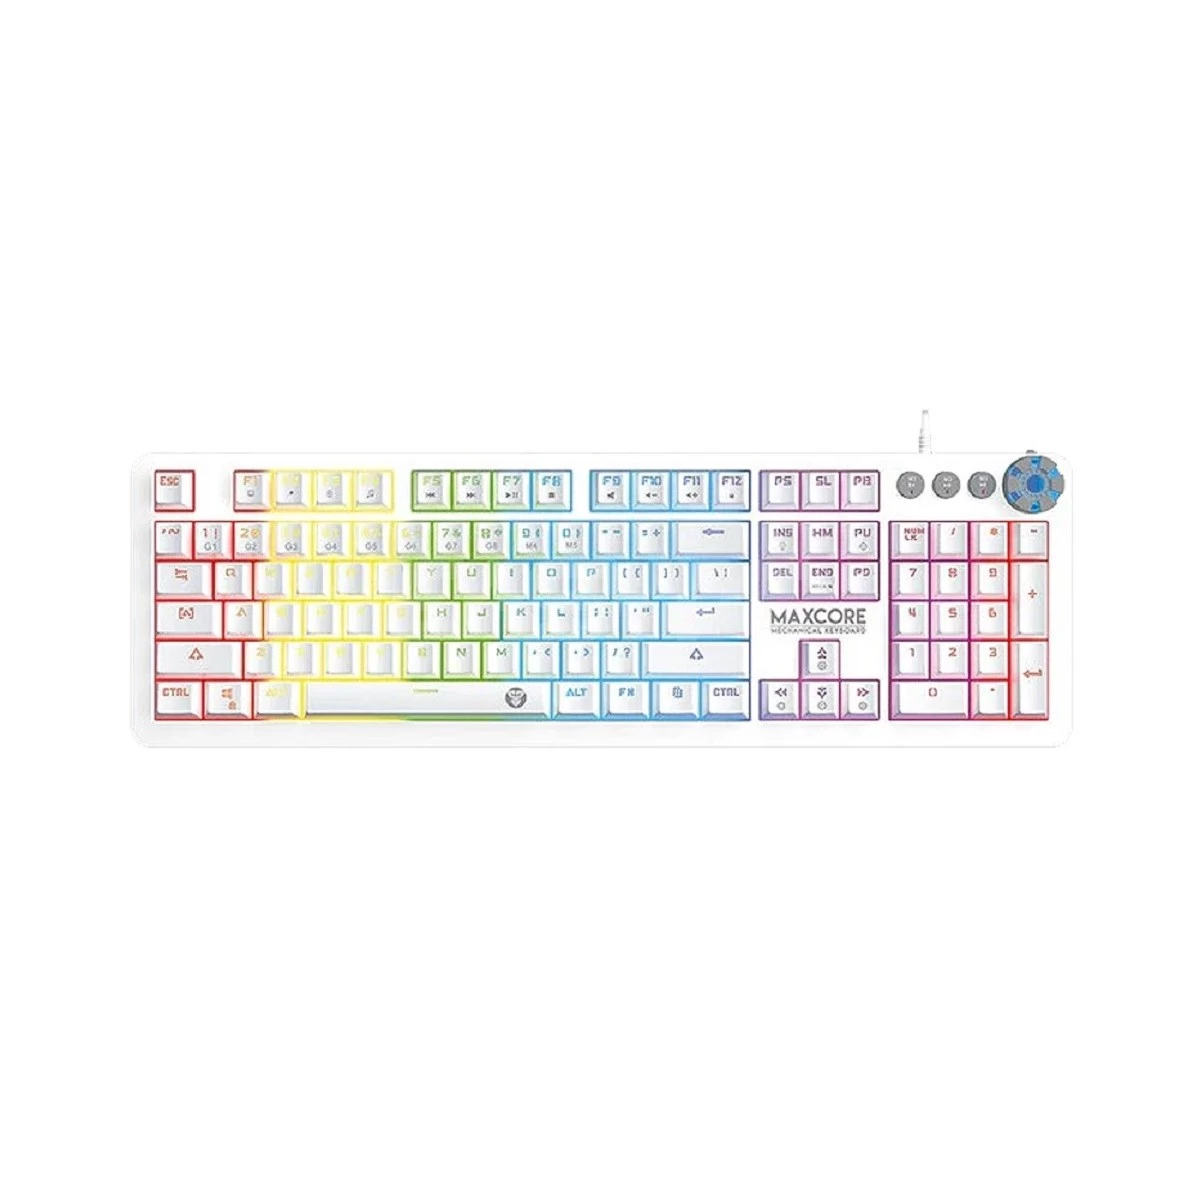 Fantech MK852 Maxcore Space White USB Wired LED Mechanical Gaming Keyboard